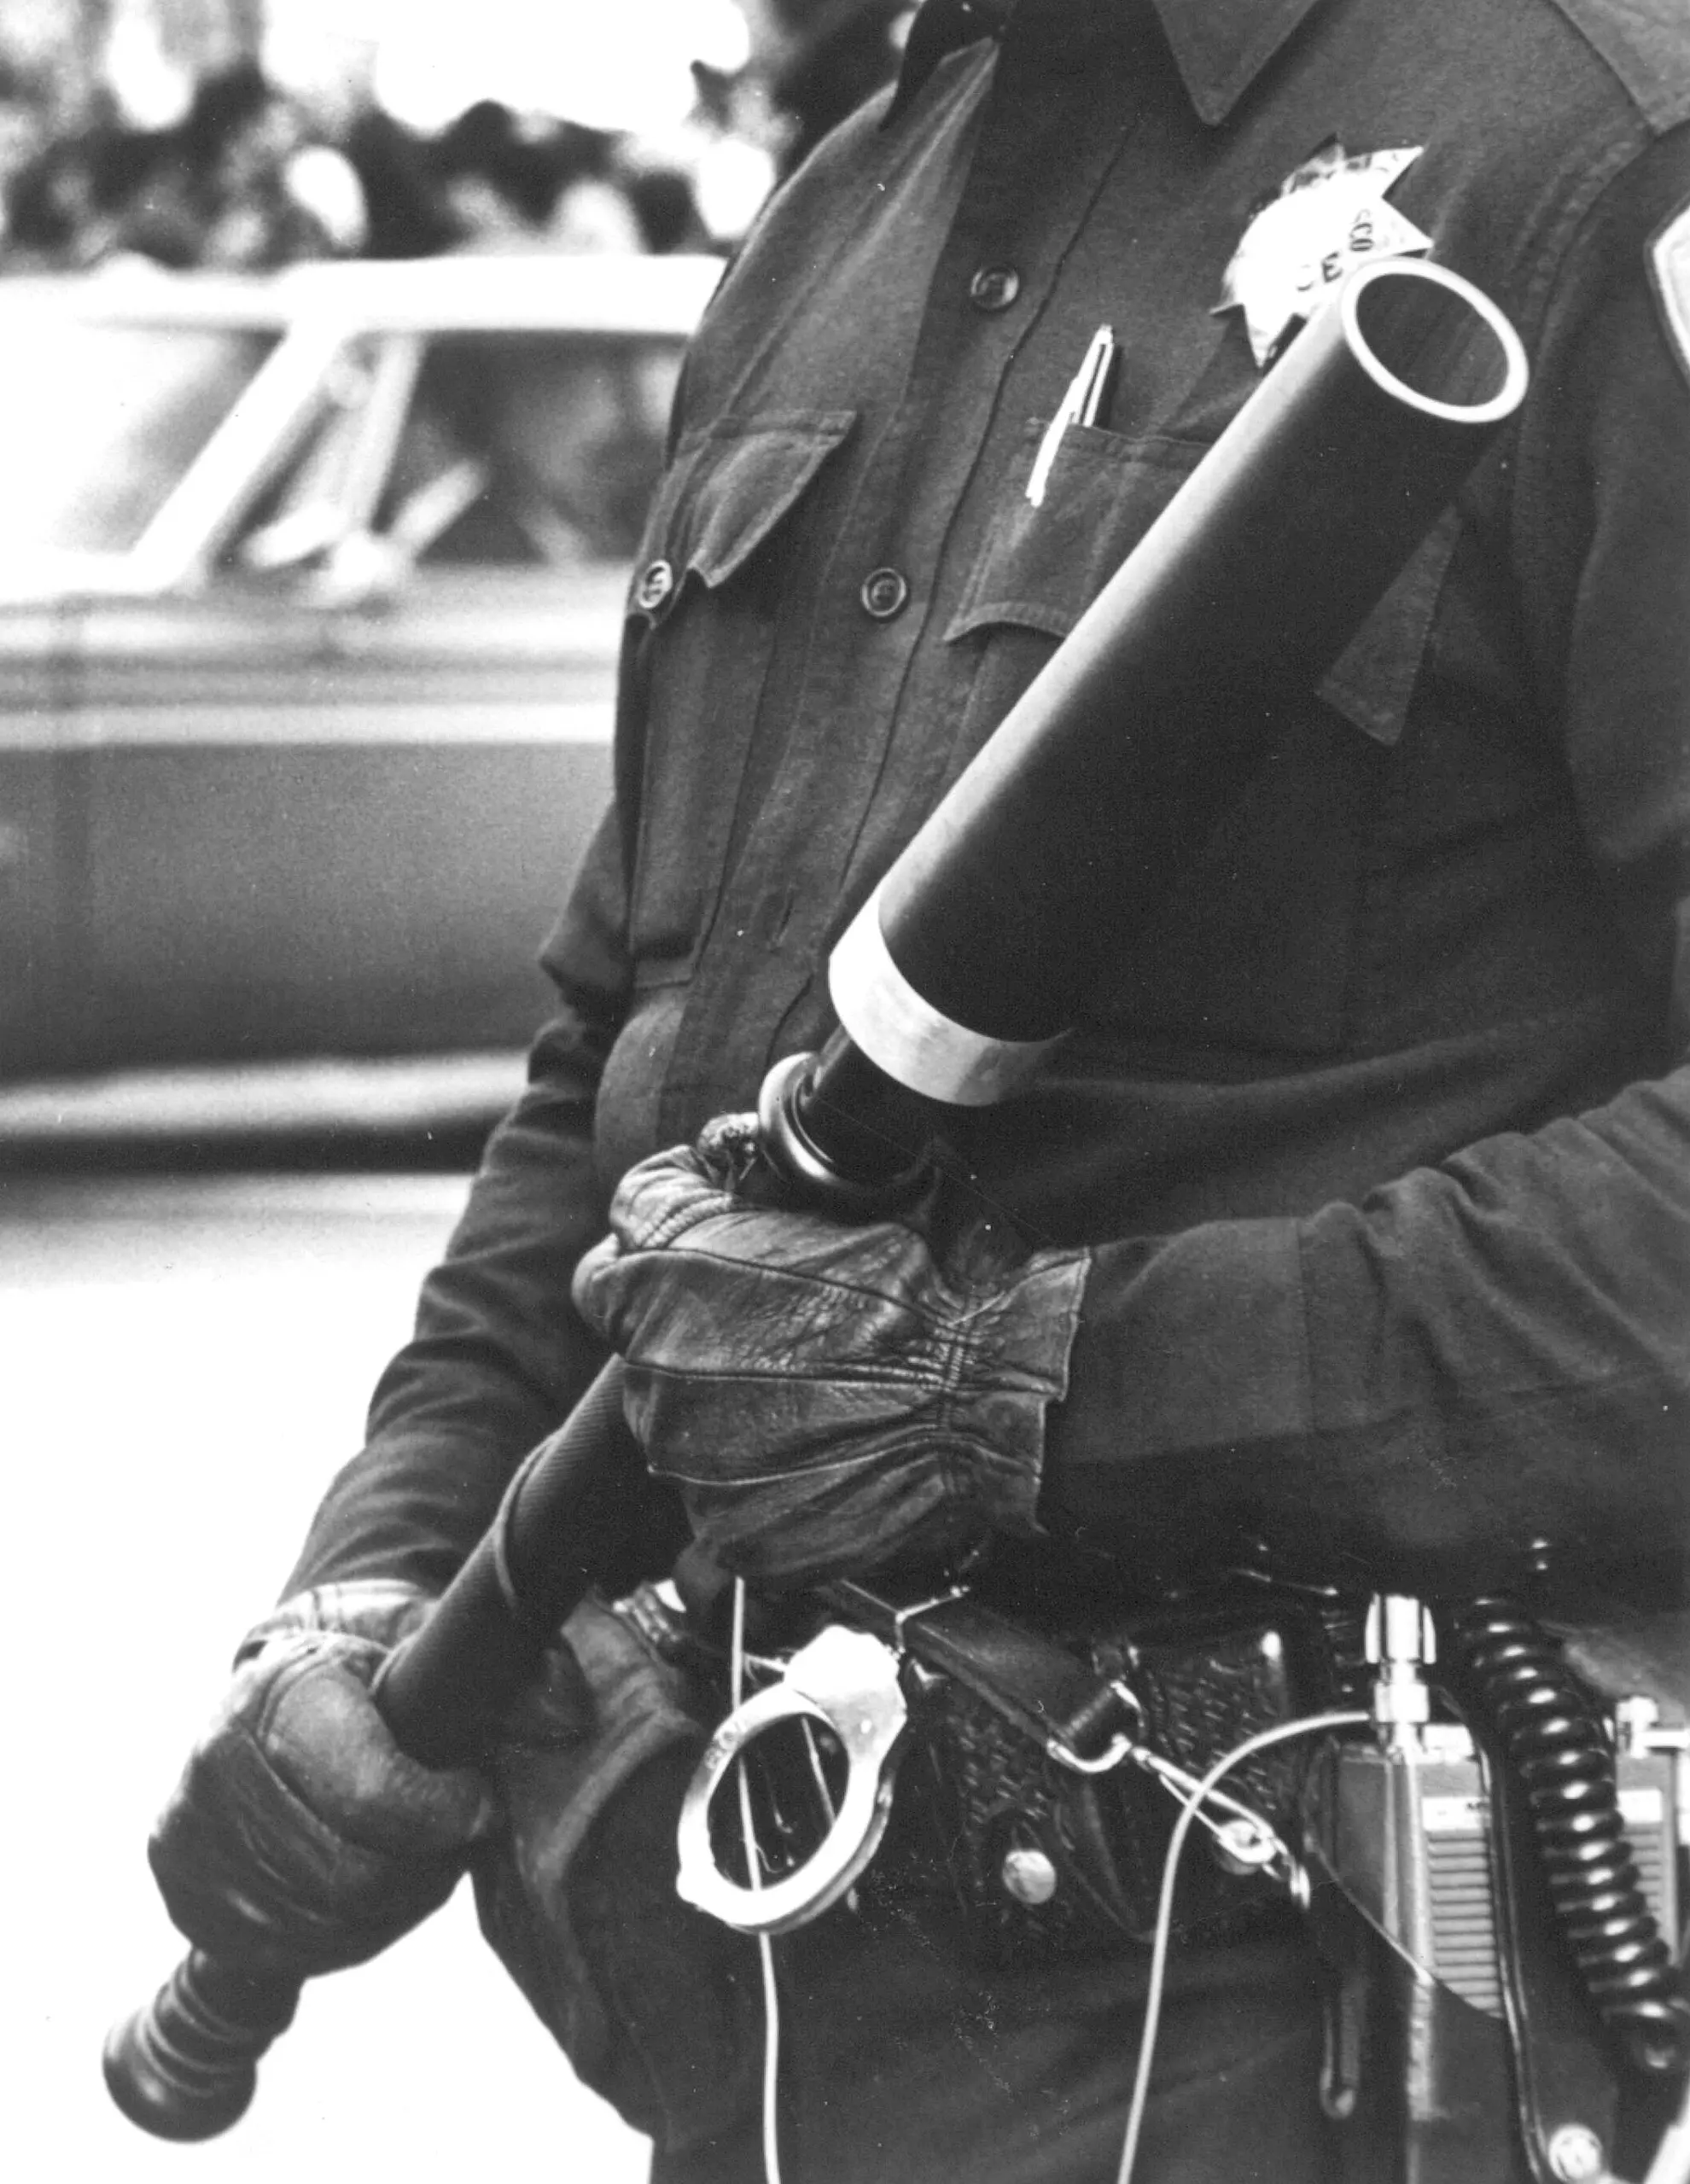 A law enforcement officer holding a prototype MB Associates Stun-Gun stands watch during anti-war demonstrations on December 1, 1970 in San Francisco.